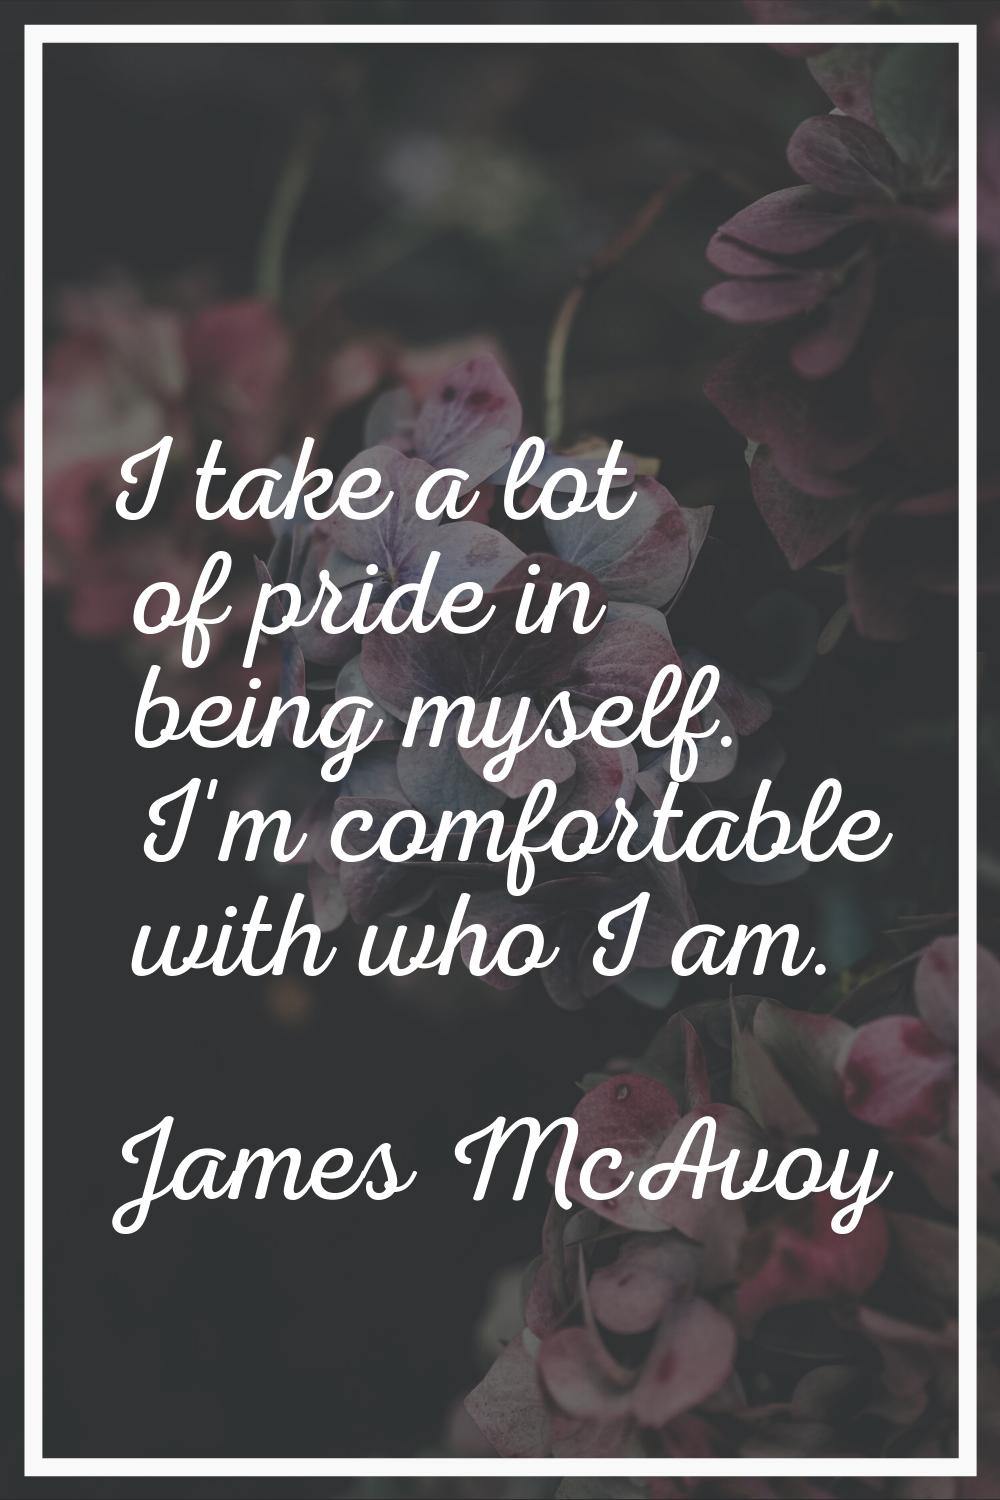 I take a lot of pride in being myself. I'm comfortable with who I am.